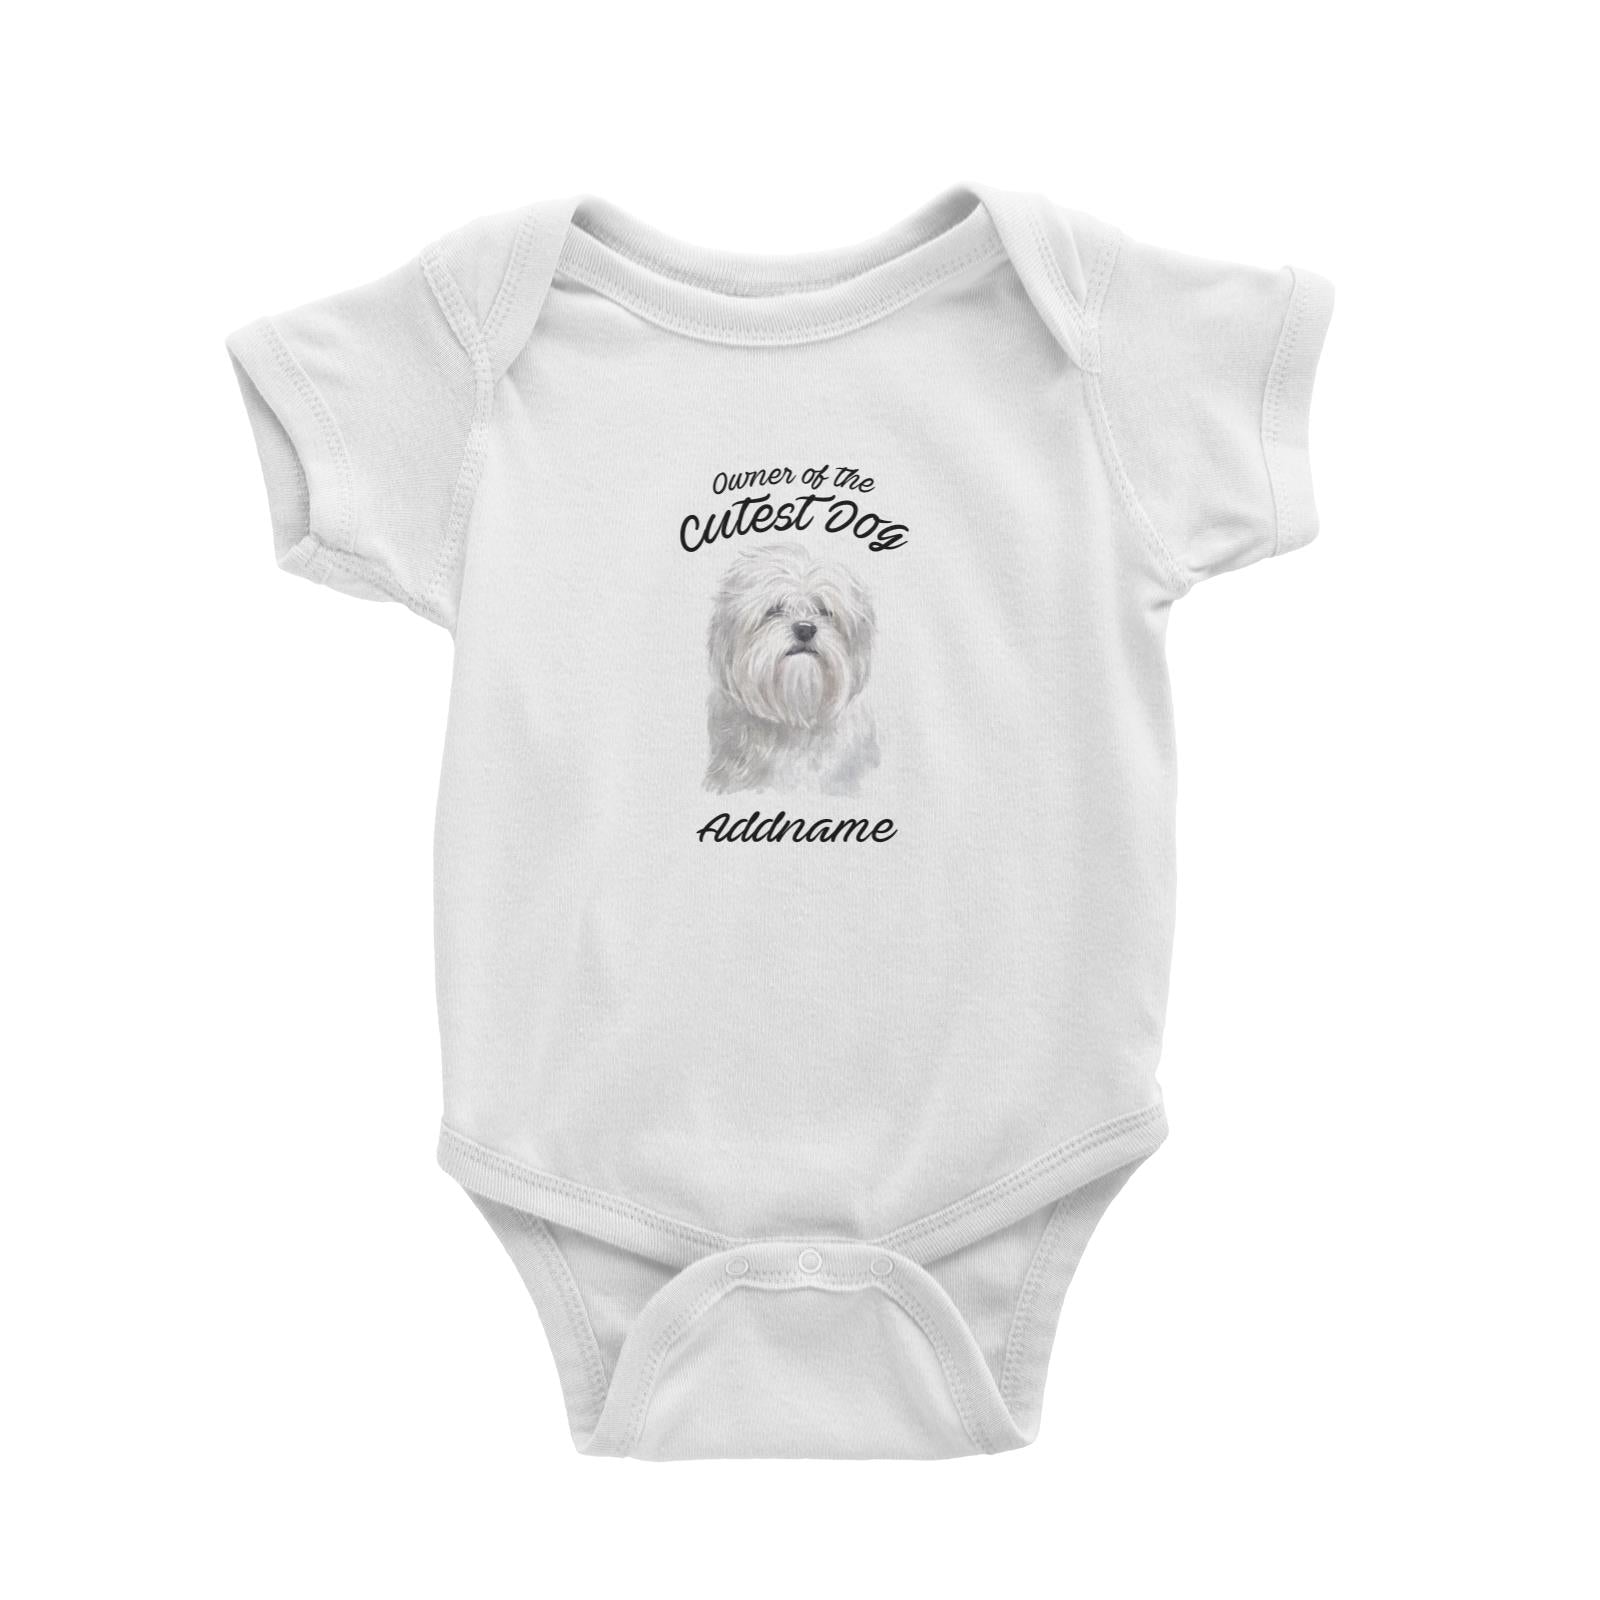 Watercolor Dog Owner Of The Cutest Dog Lhasa Apso Addname Baby Romper